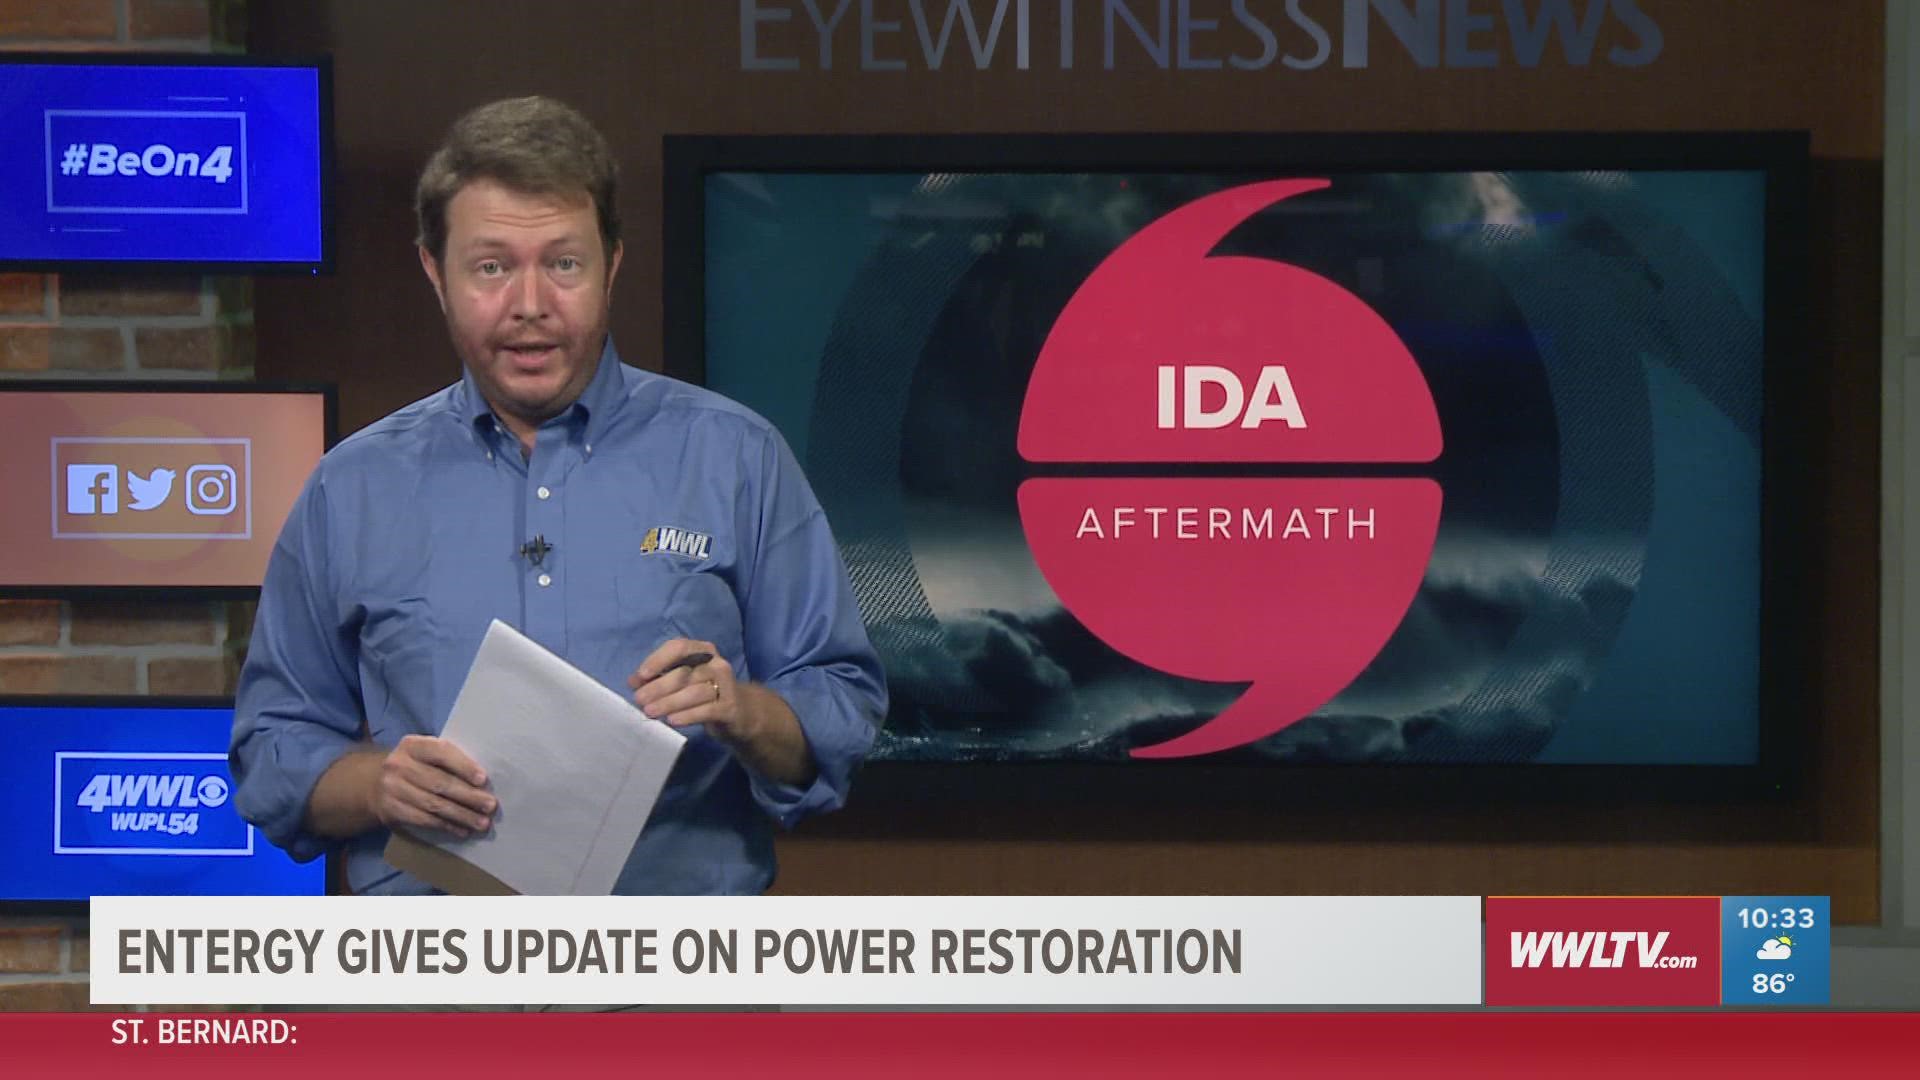 There are still many people without power, but power is slowly restoring to many customers impacted by Hurricane Ida.